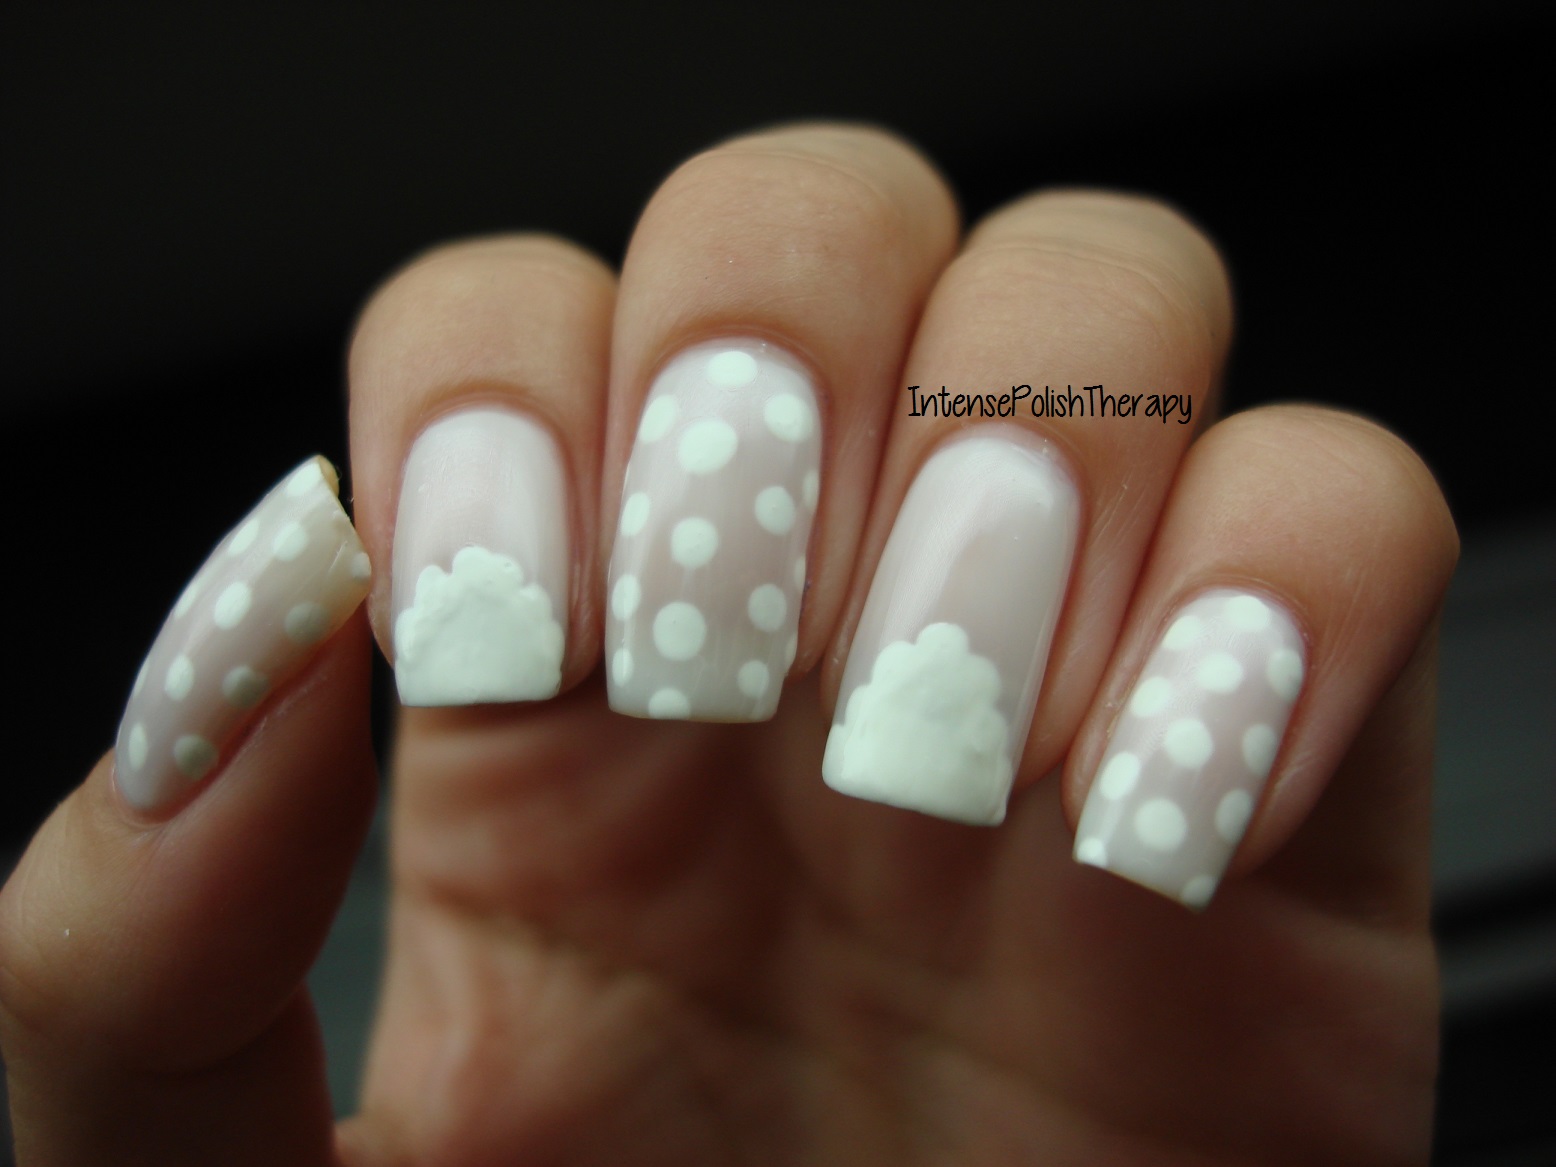 1. Simple White Nail Art Designs for Beginners - wide 4